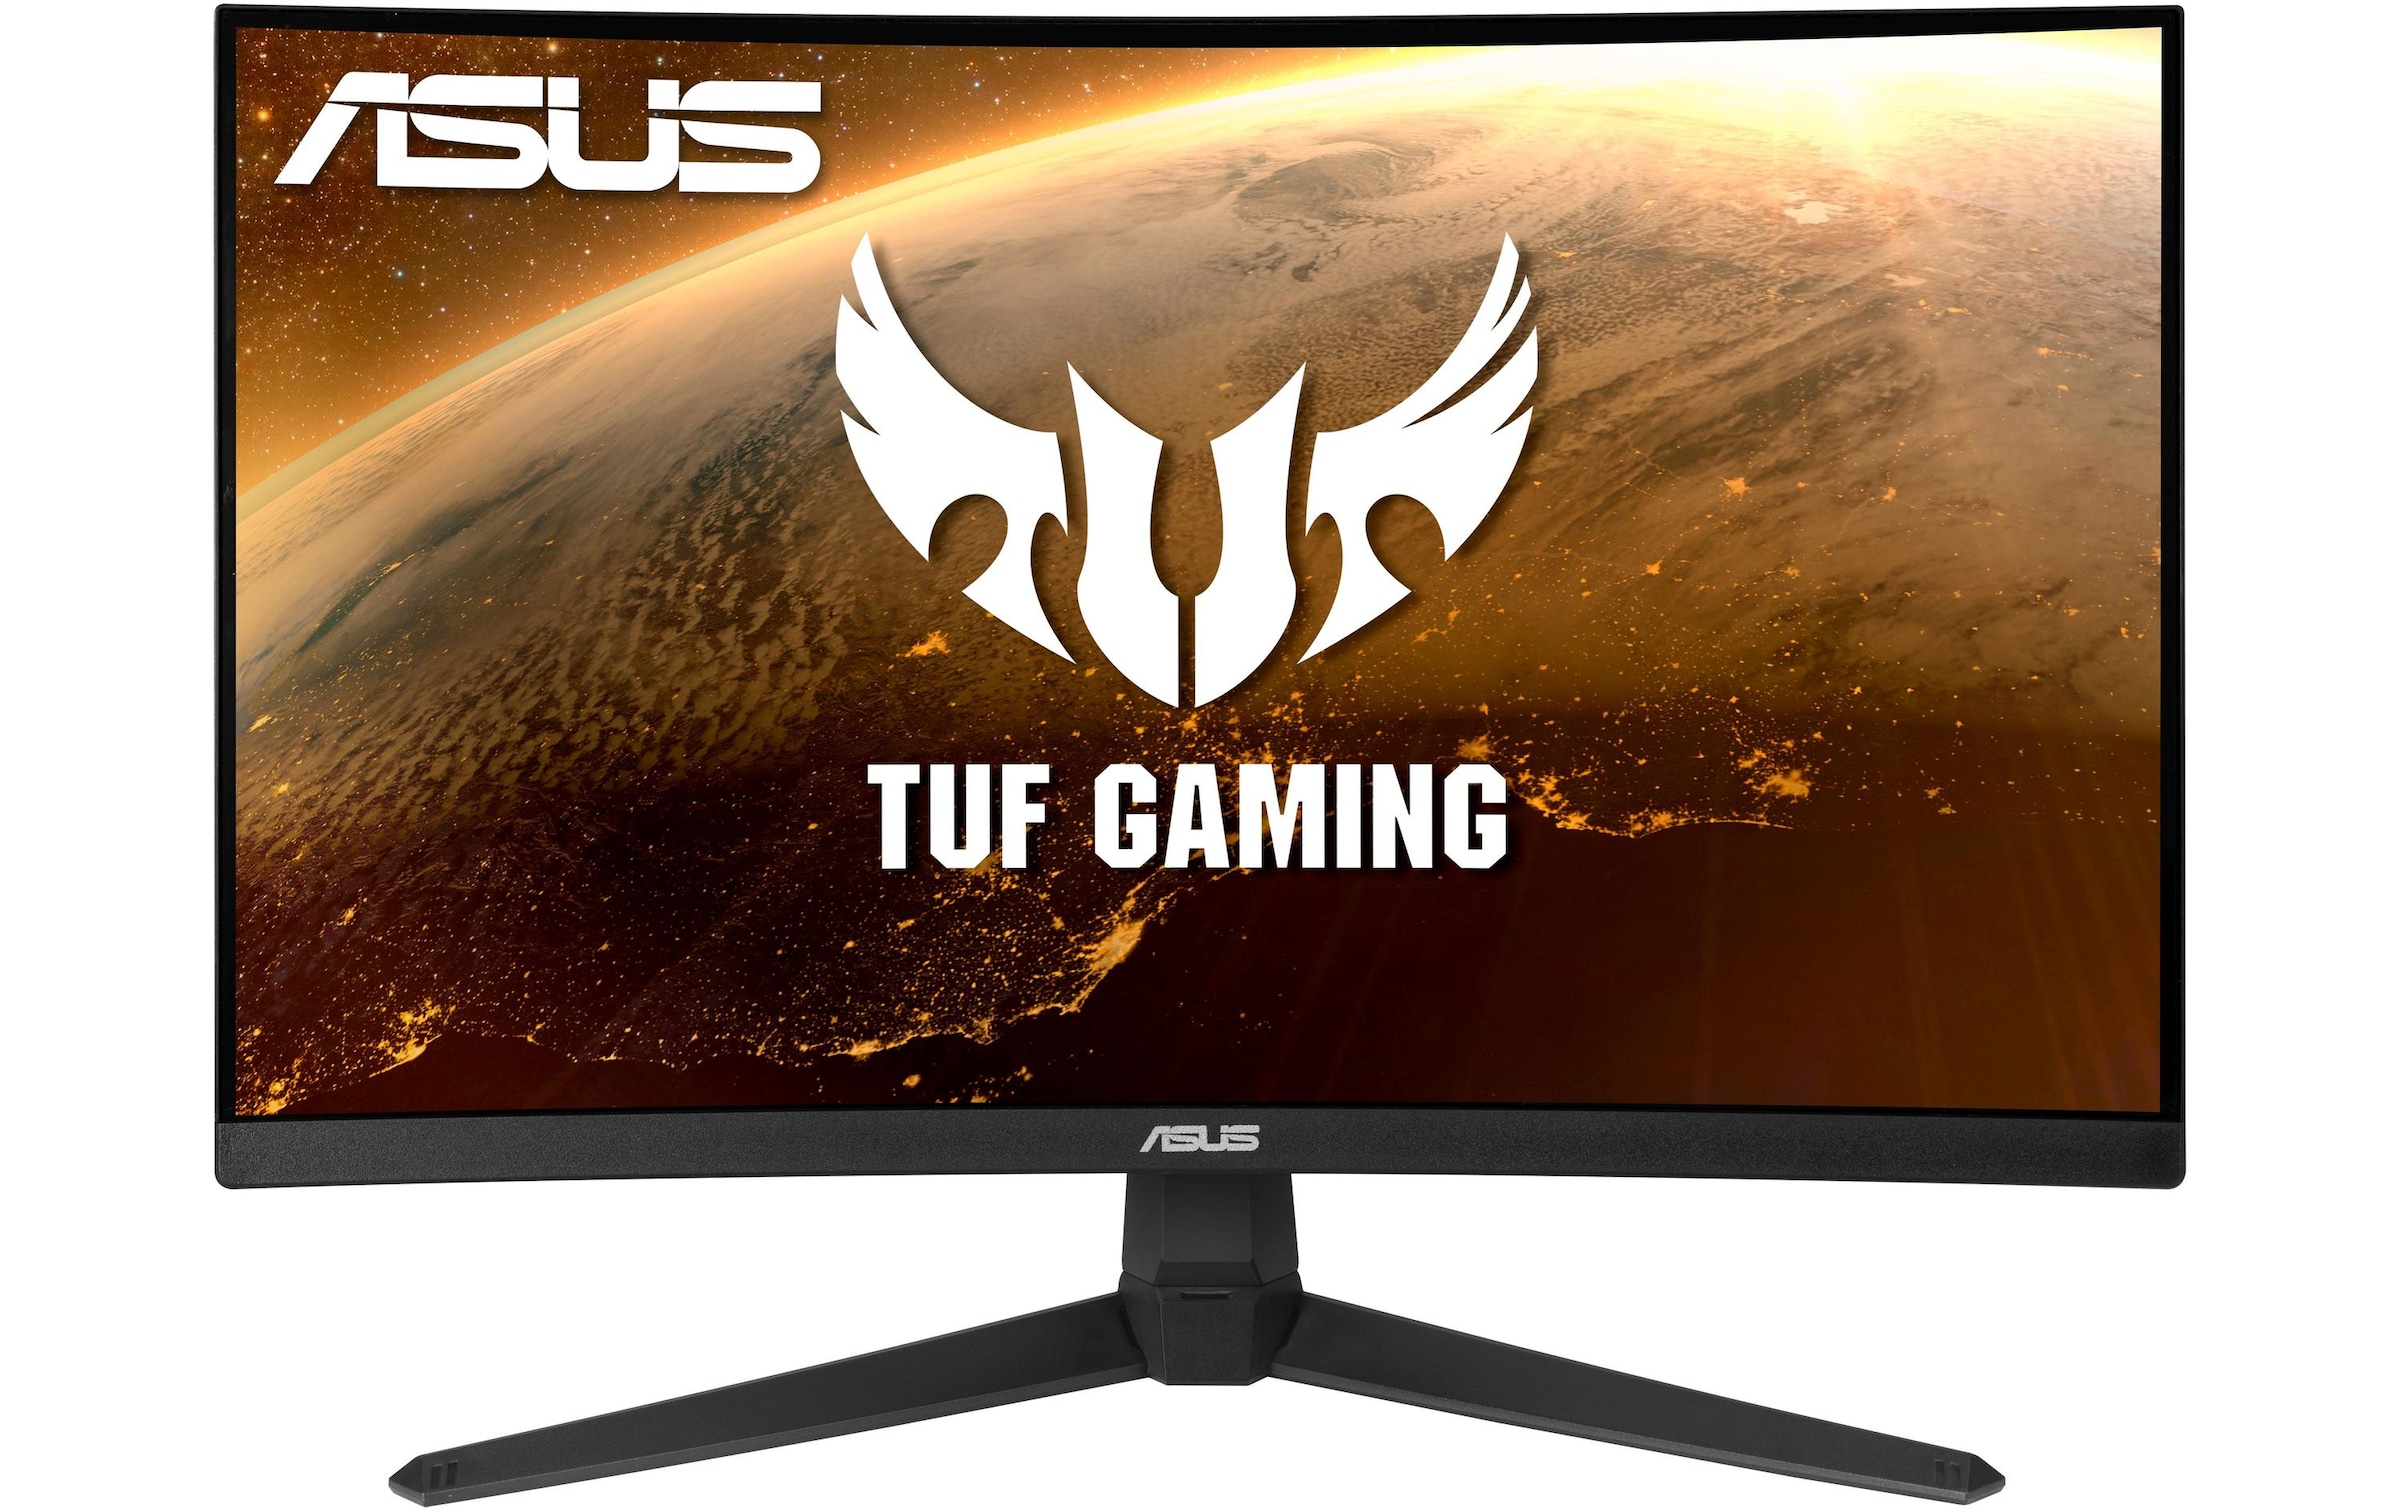 Asus Curved-Gaming-Monitor »ASUS VG24VQ1B«, 60,21 cm/23,8 Zoll, 1920 x 1080 px, Full HD, 7 ms Reaktionszeit, 165 Hz